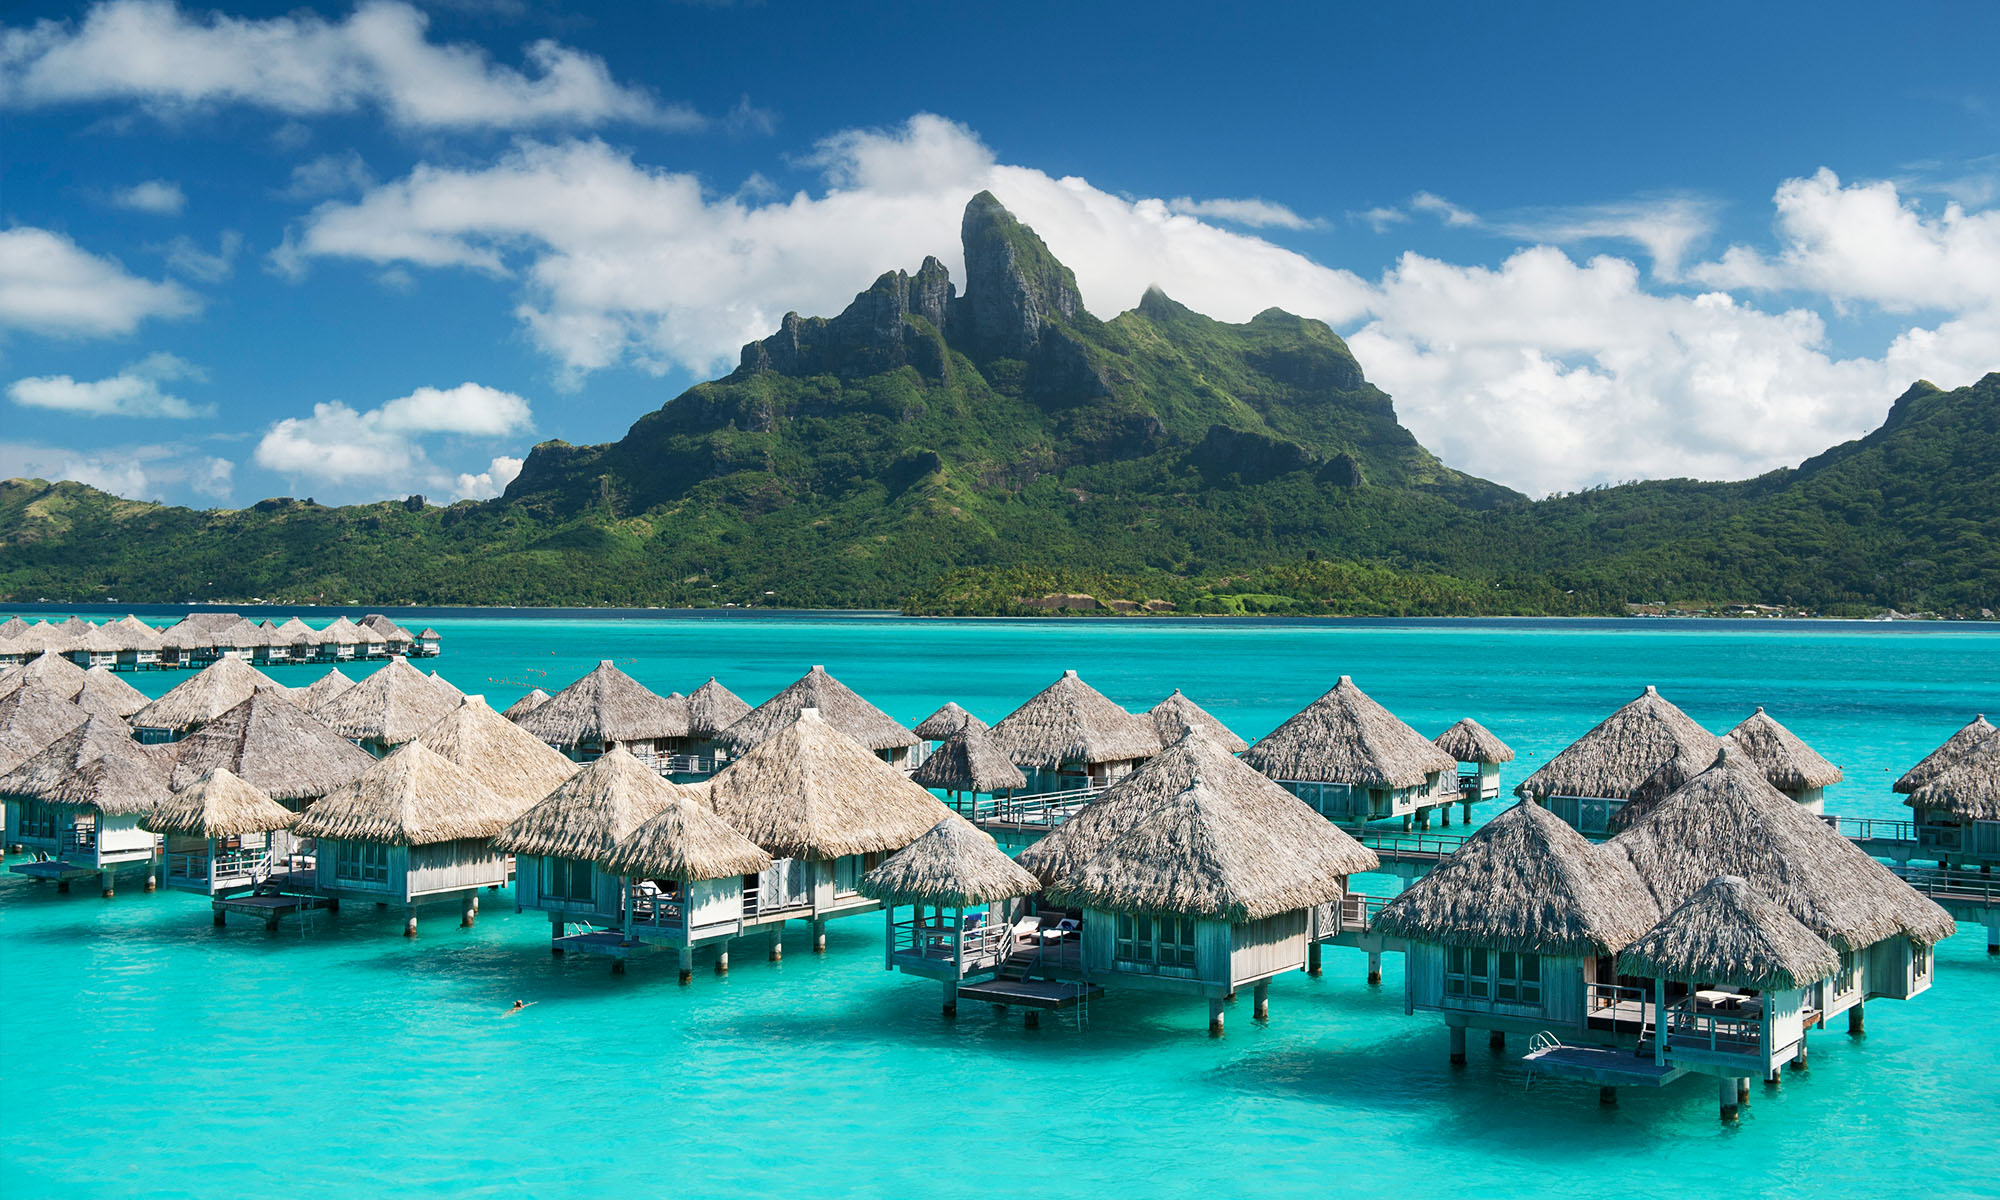 Seattle to Tahiti $696 RT Nonstop Airfares with 1 Free Checked Bag & Free Change on Air Tahiti Nui (Travel November - March 2023)